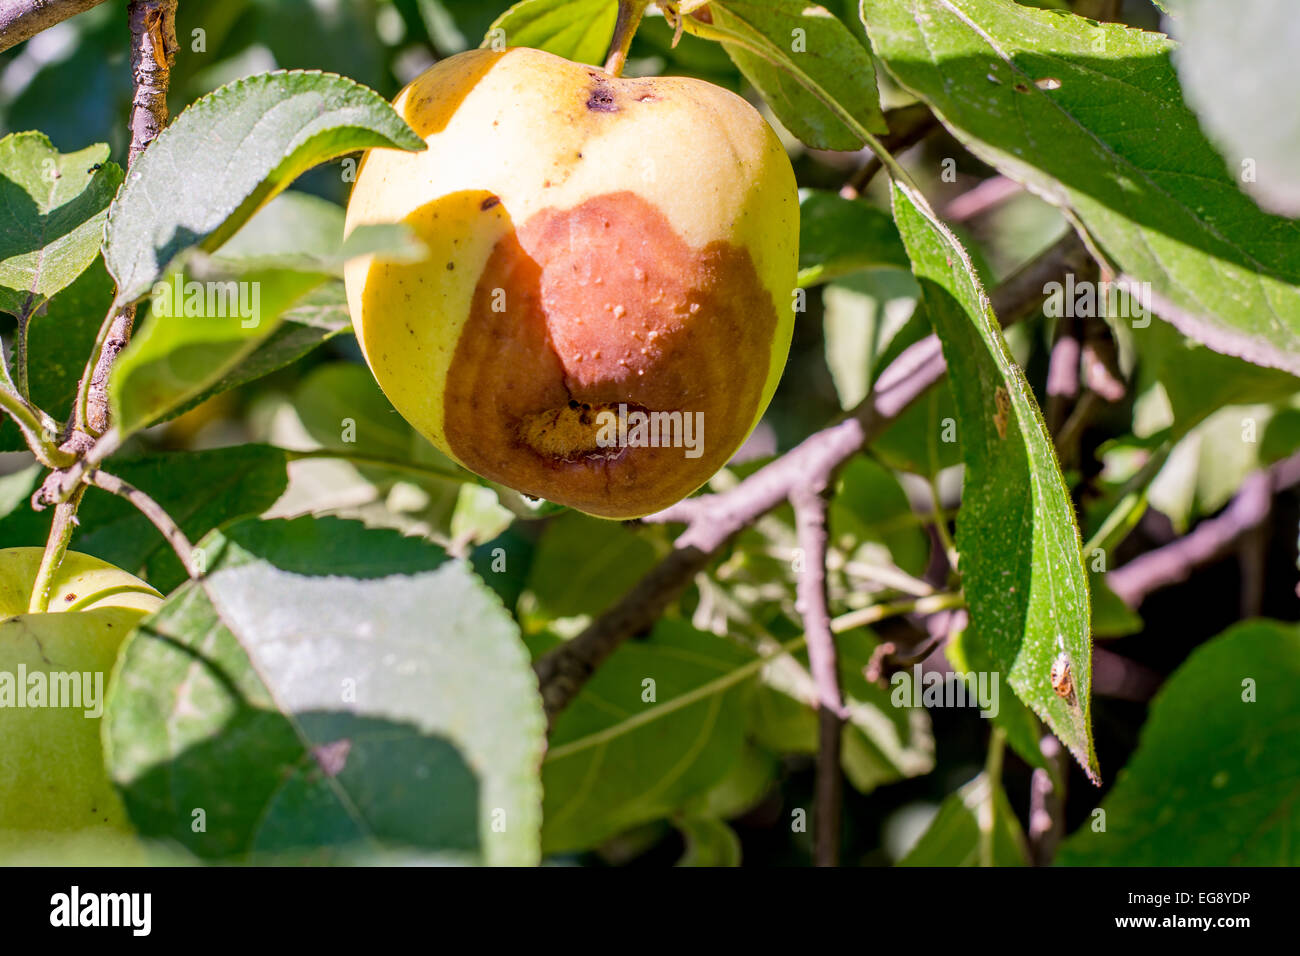 Rotten and over-ripe apple hanging on a branch with leaves Stock Photo